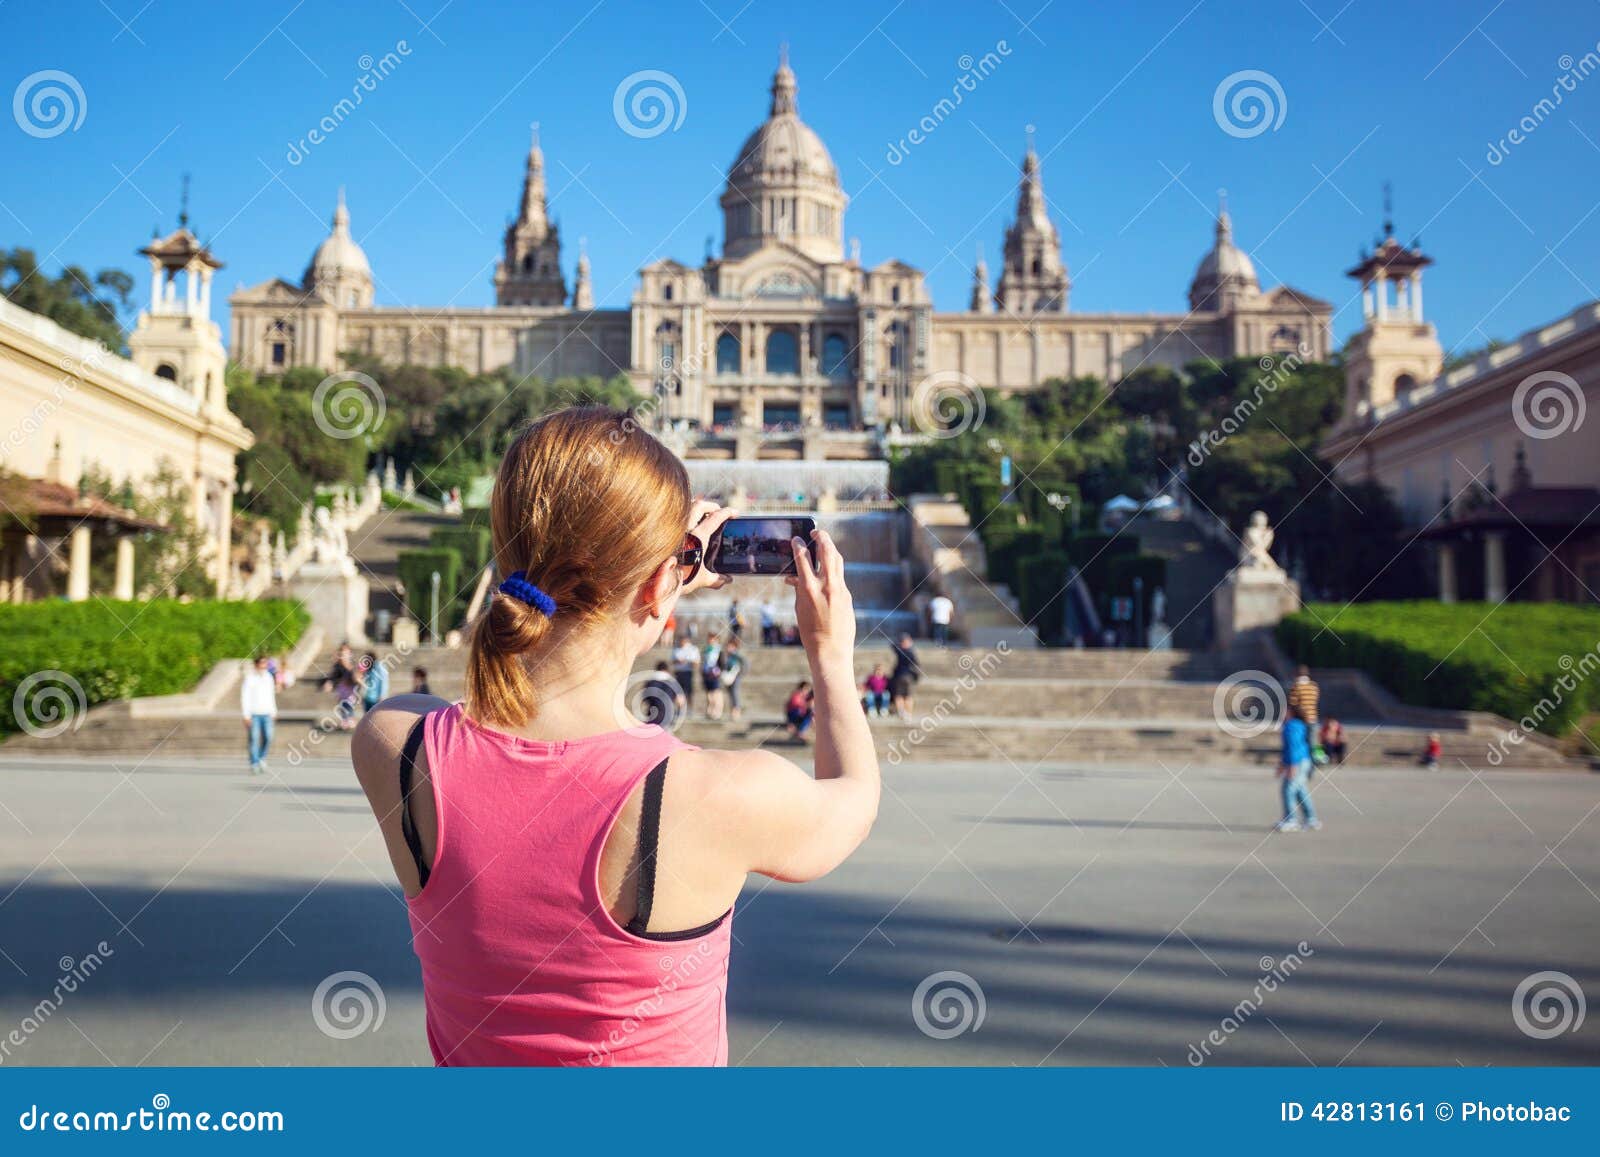 young woman taking picture of catalan art museum (mnac)